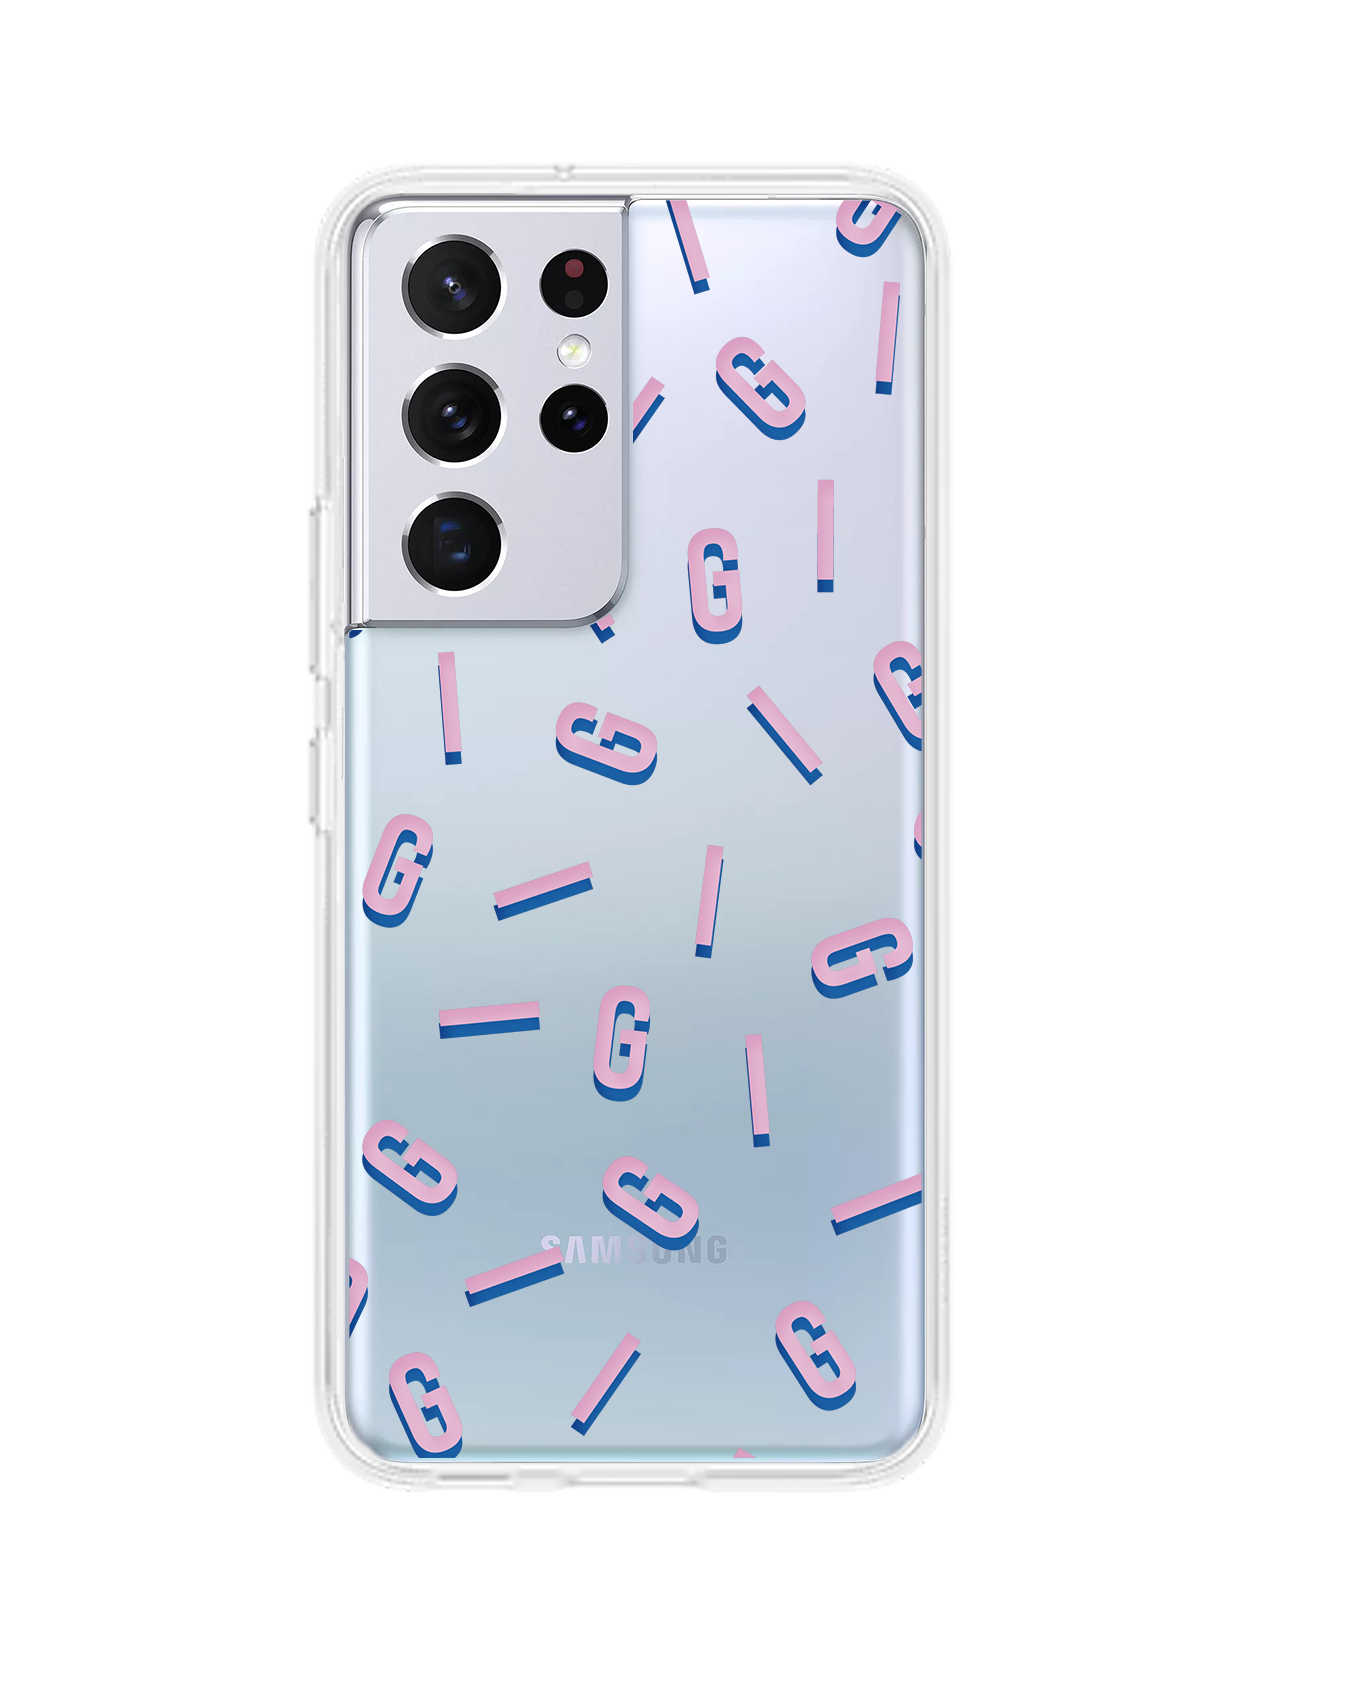 Android Rearguard Hybrid Case - CUSTOM MONOGRAM Cotton Candy